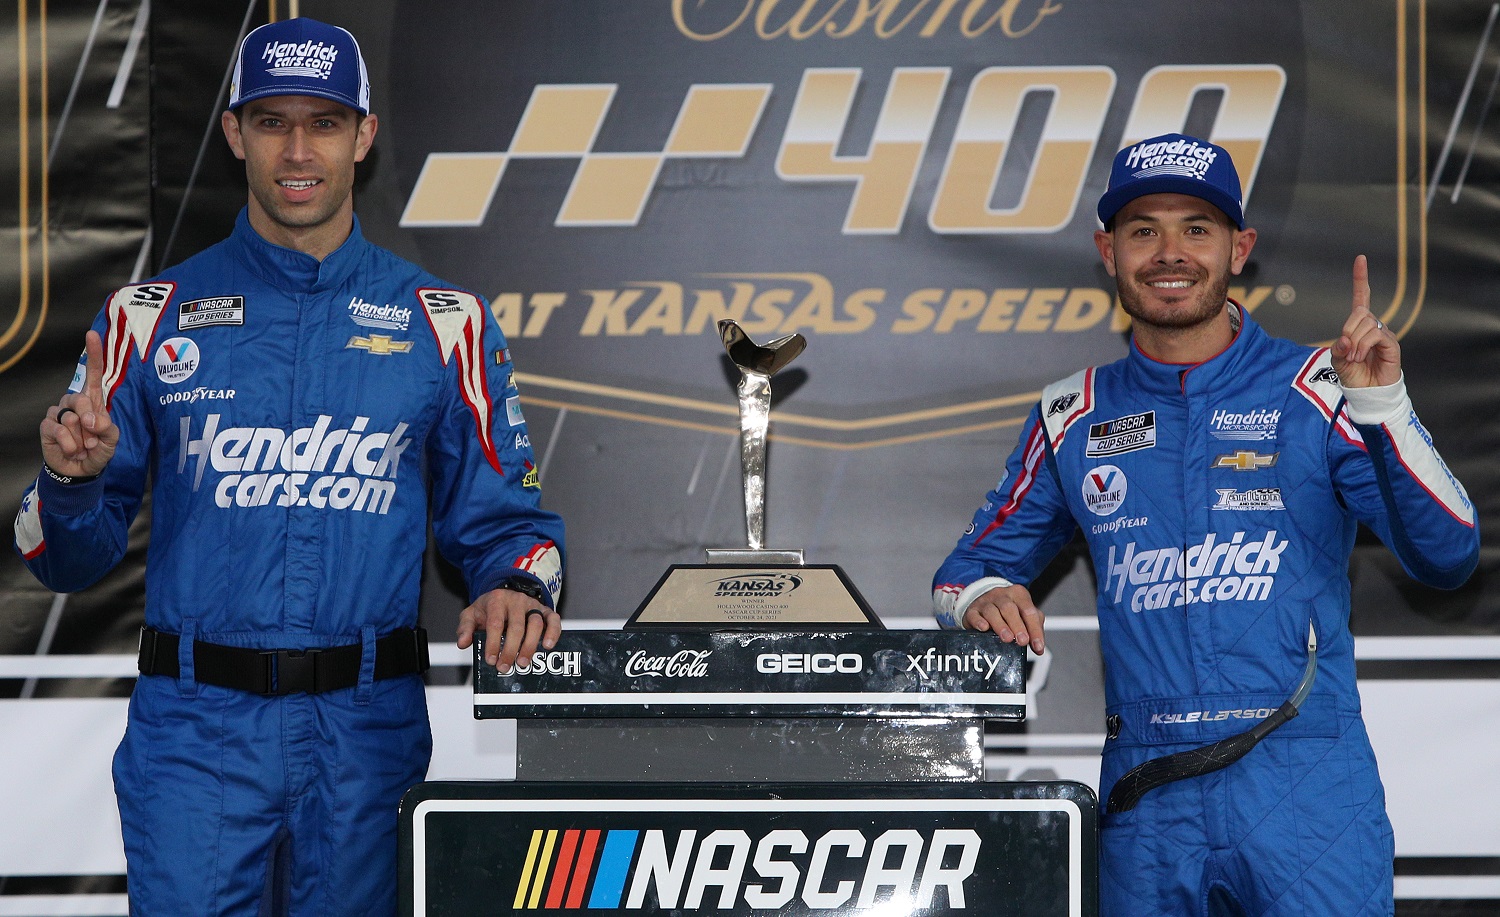 Crew chief Cliff Daniels and driver Kyle Larson of Hendrick Motorsports celebrate in victory lane after winning the NASCAR Cup Series Hollywood Casino 400 at Kansas Speedway on Oct. 24, 2021.